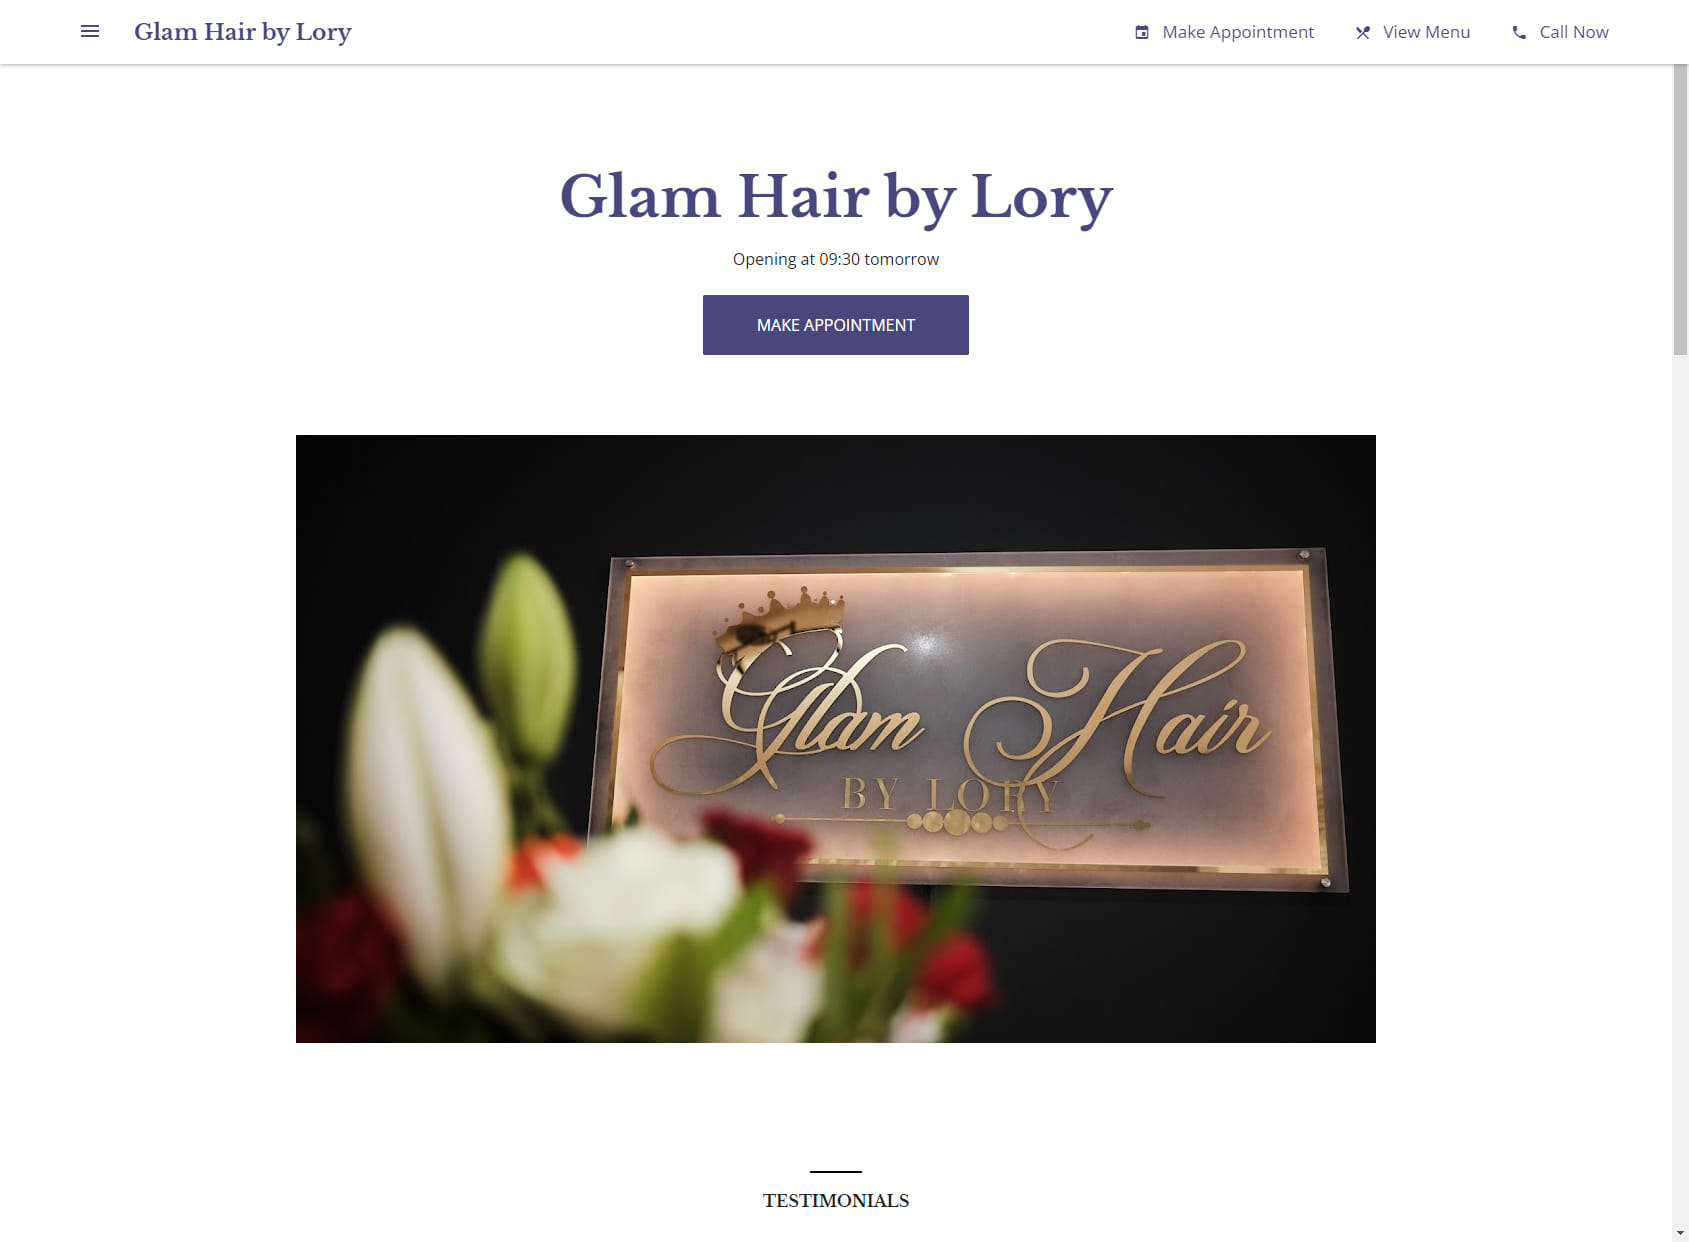 Glam Hair by Lory